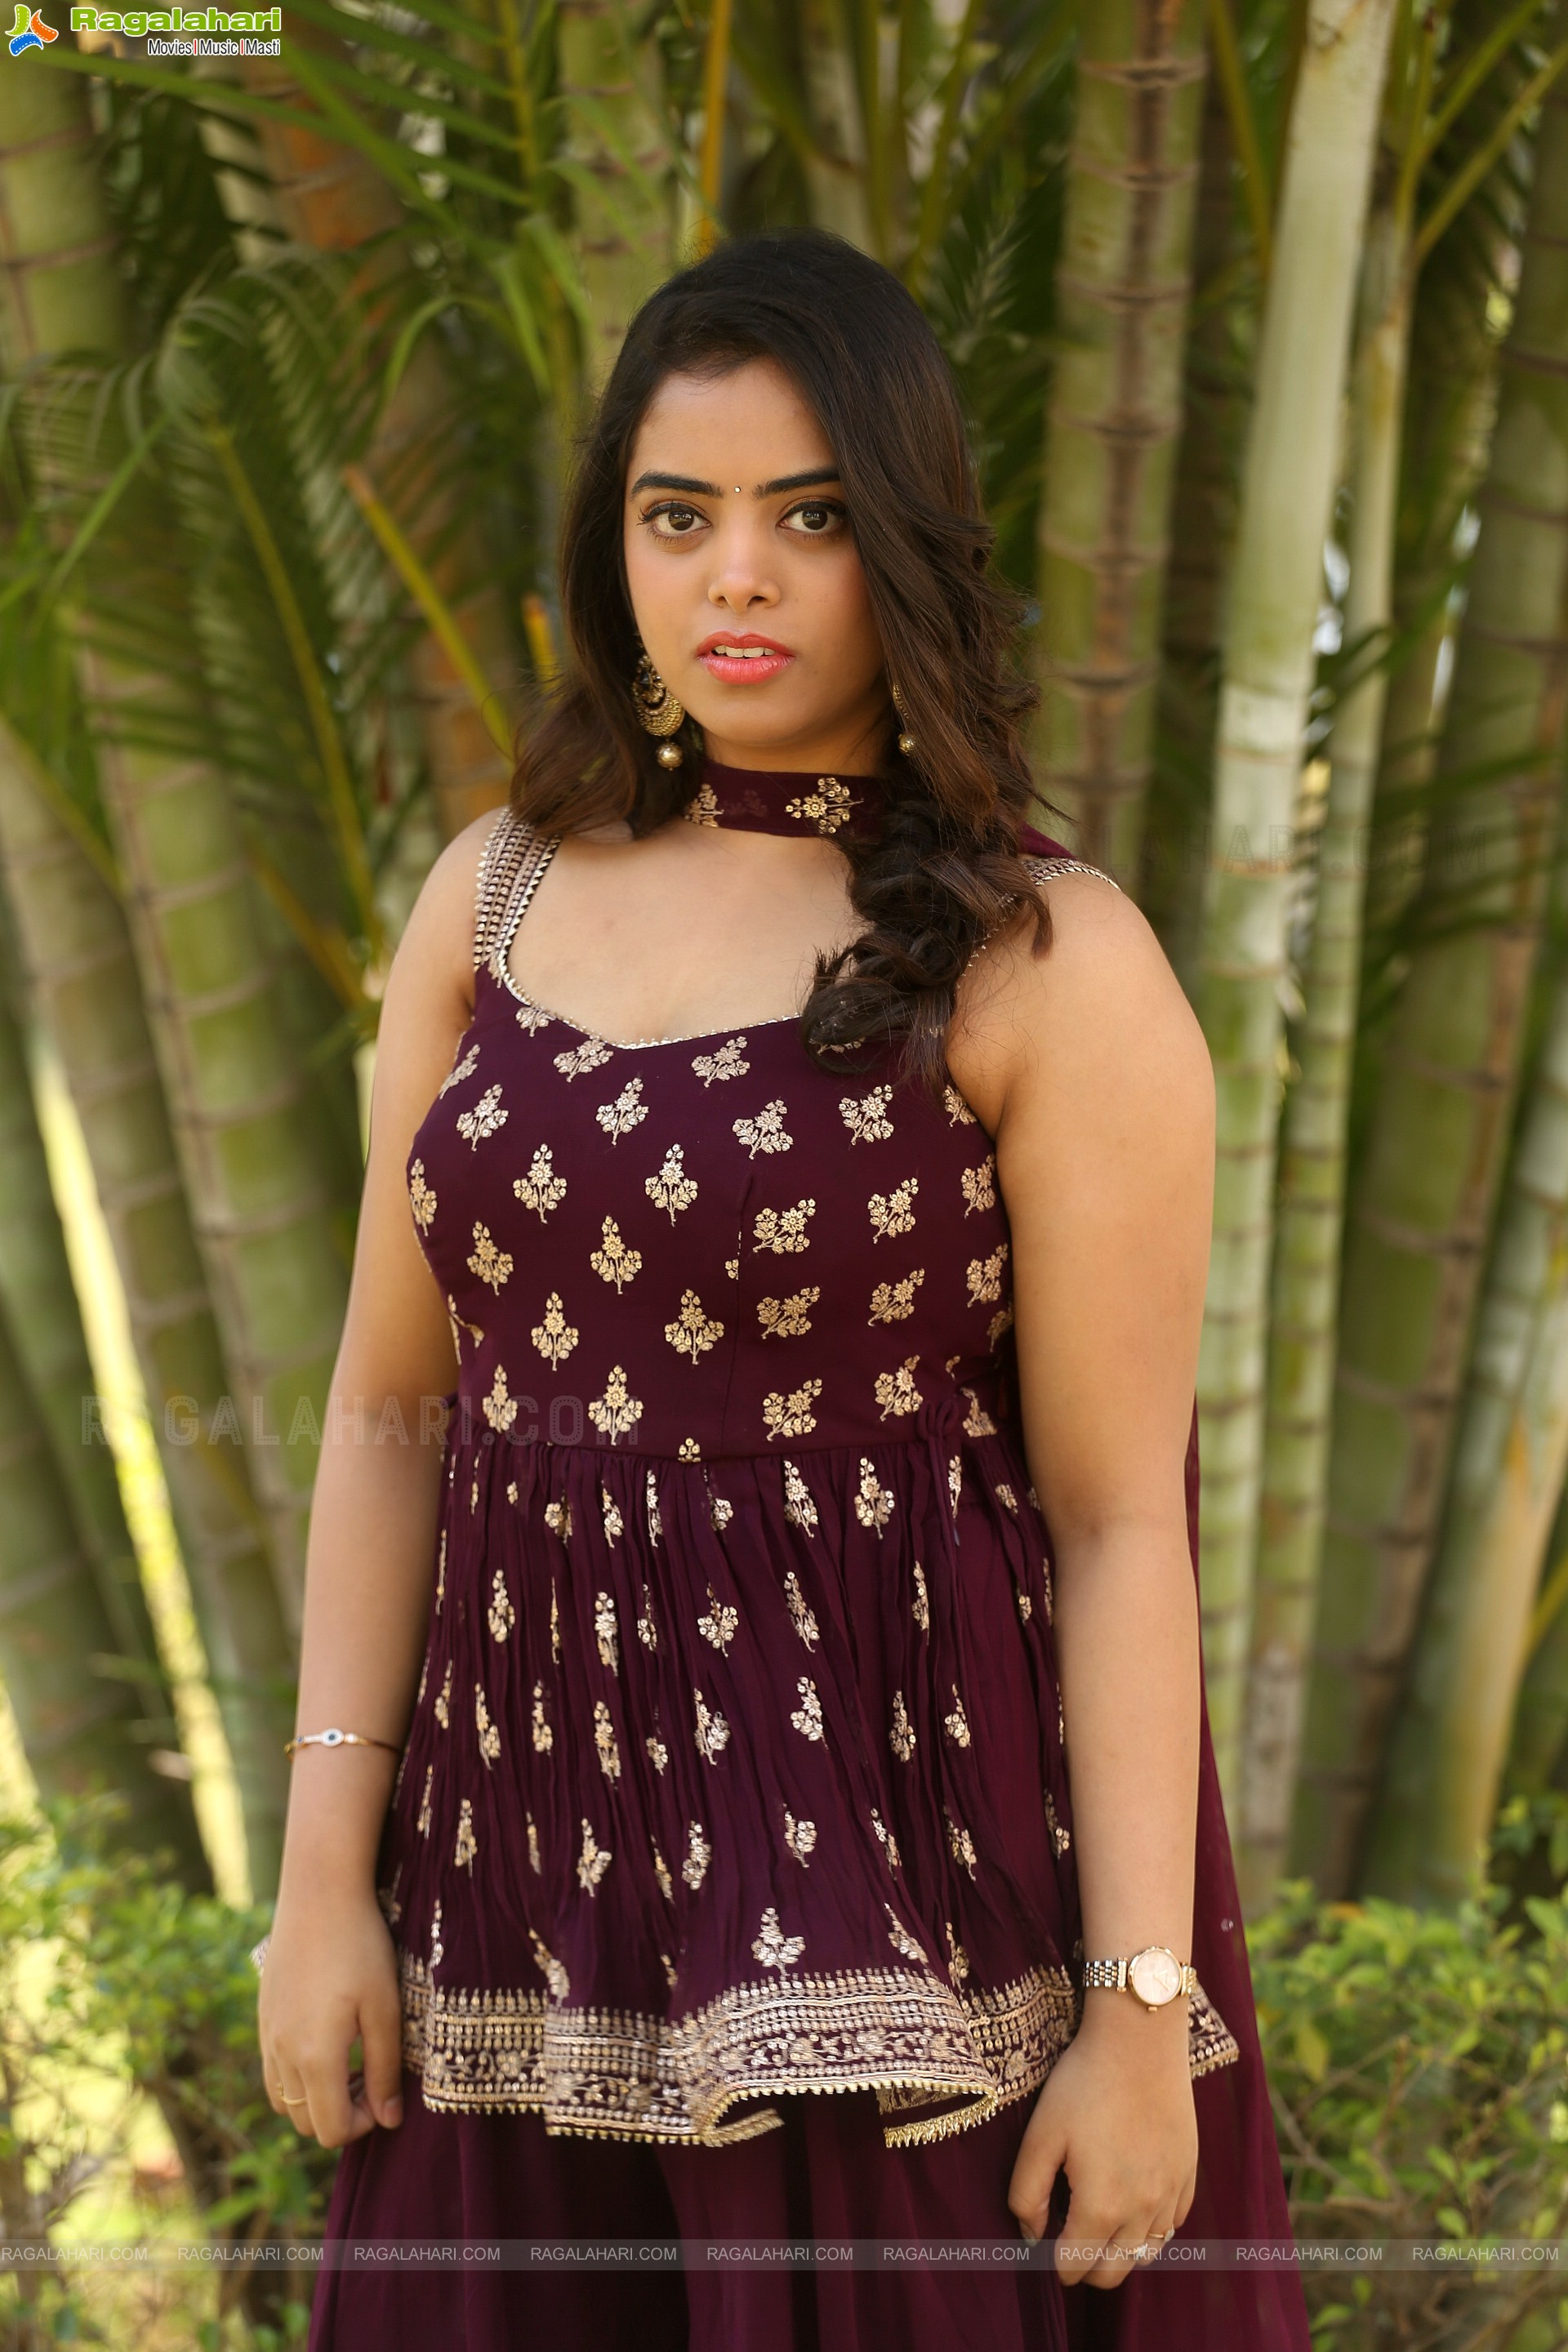 Manjeera Reddy at Chiclets Movie Trailer Launch, HD Photo Gallery